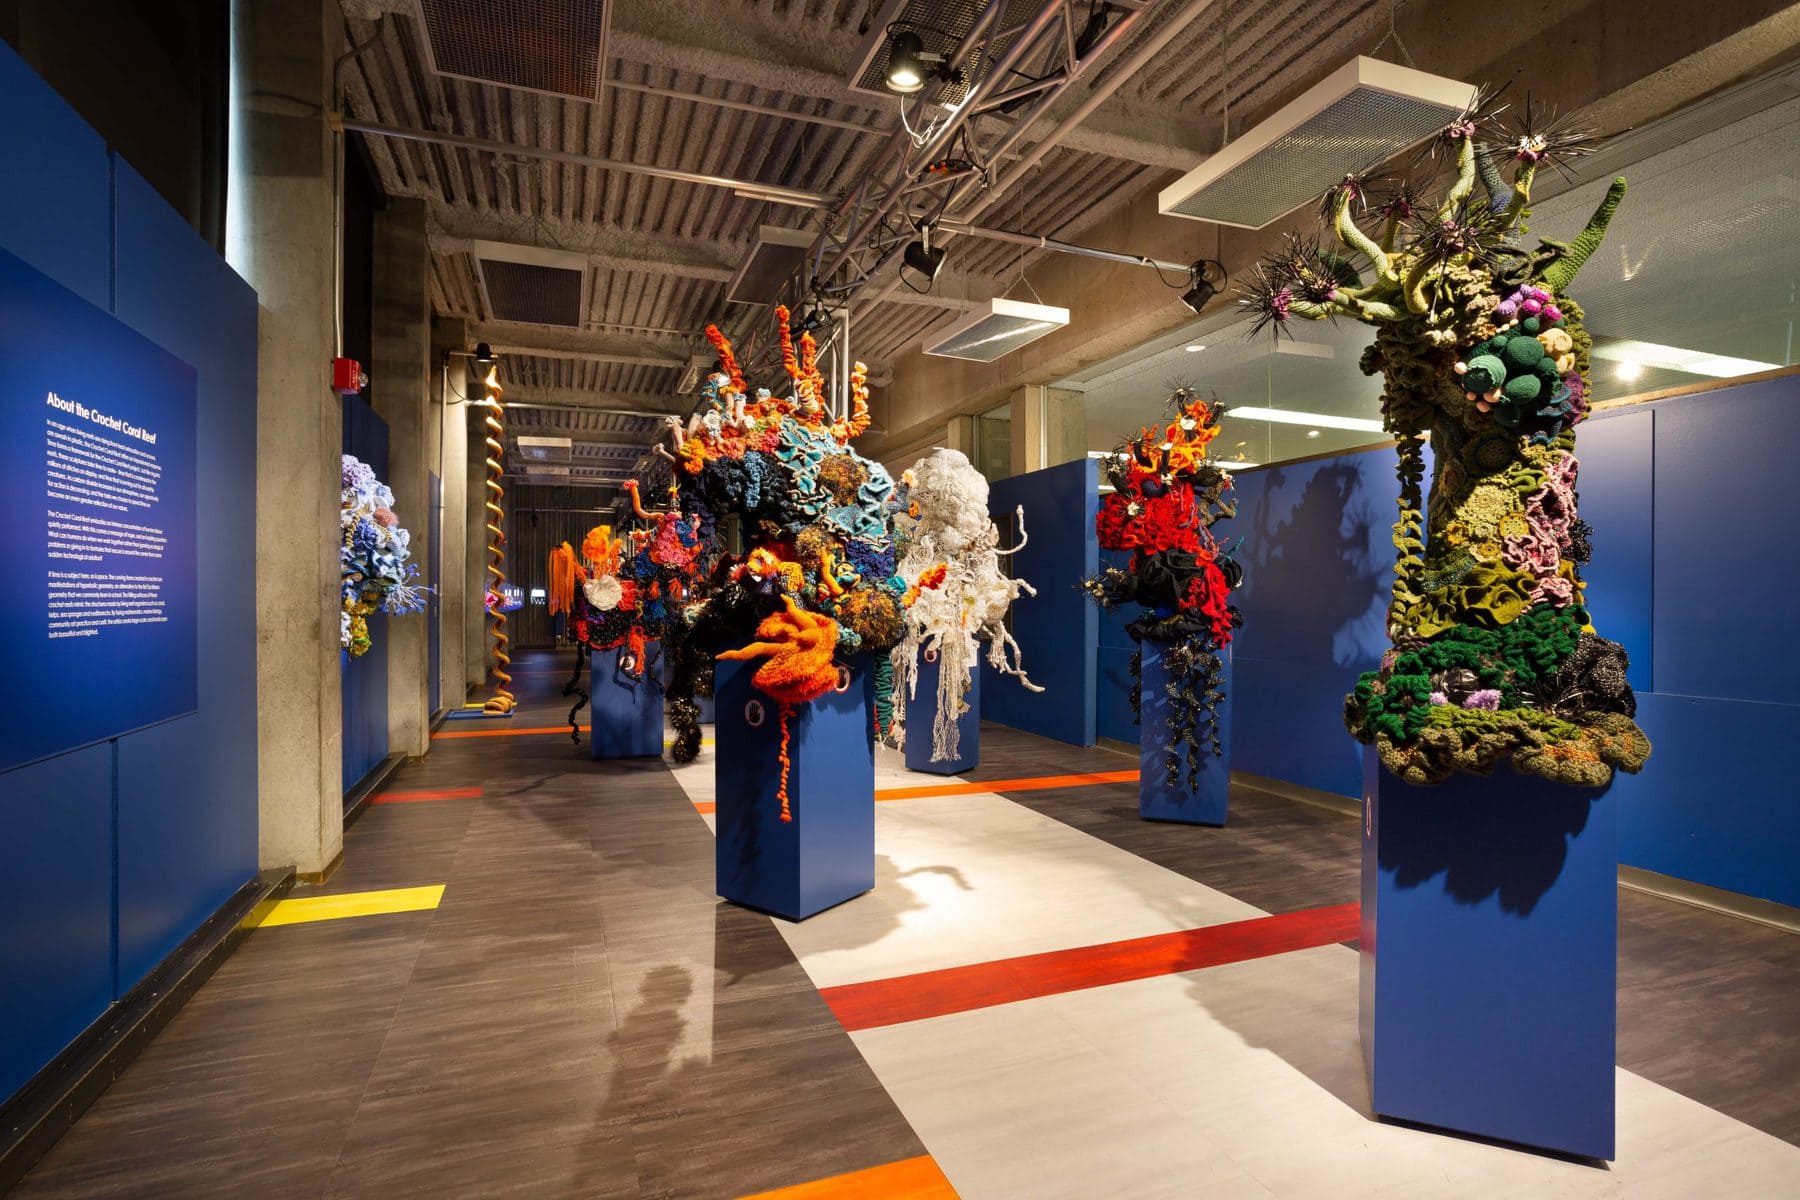 image description: a view of several items in the crochet coral reef exhibition